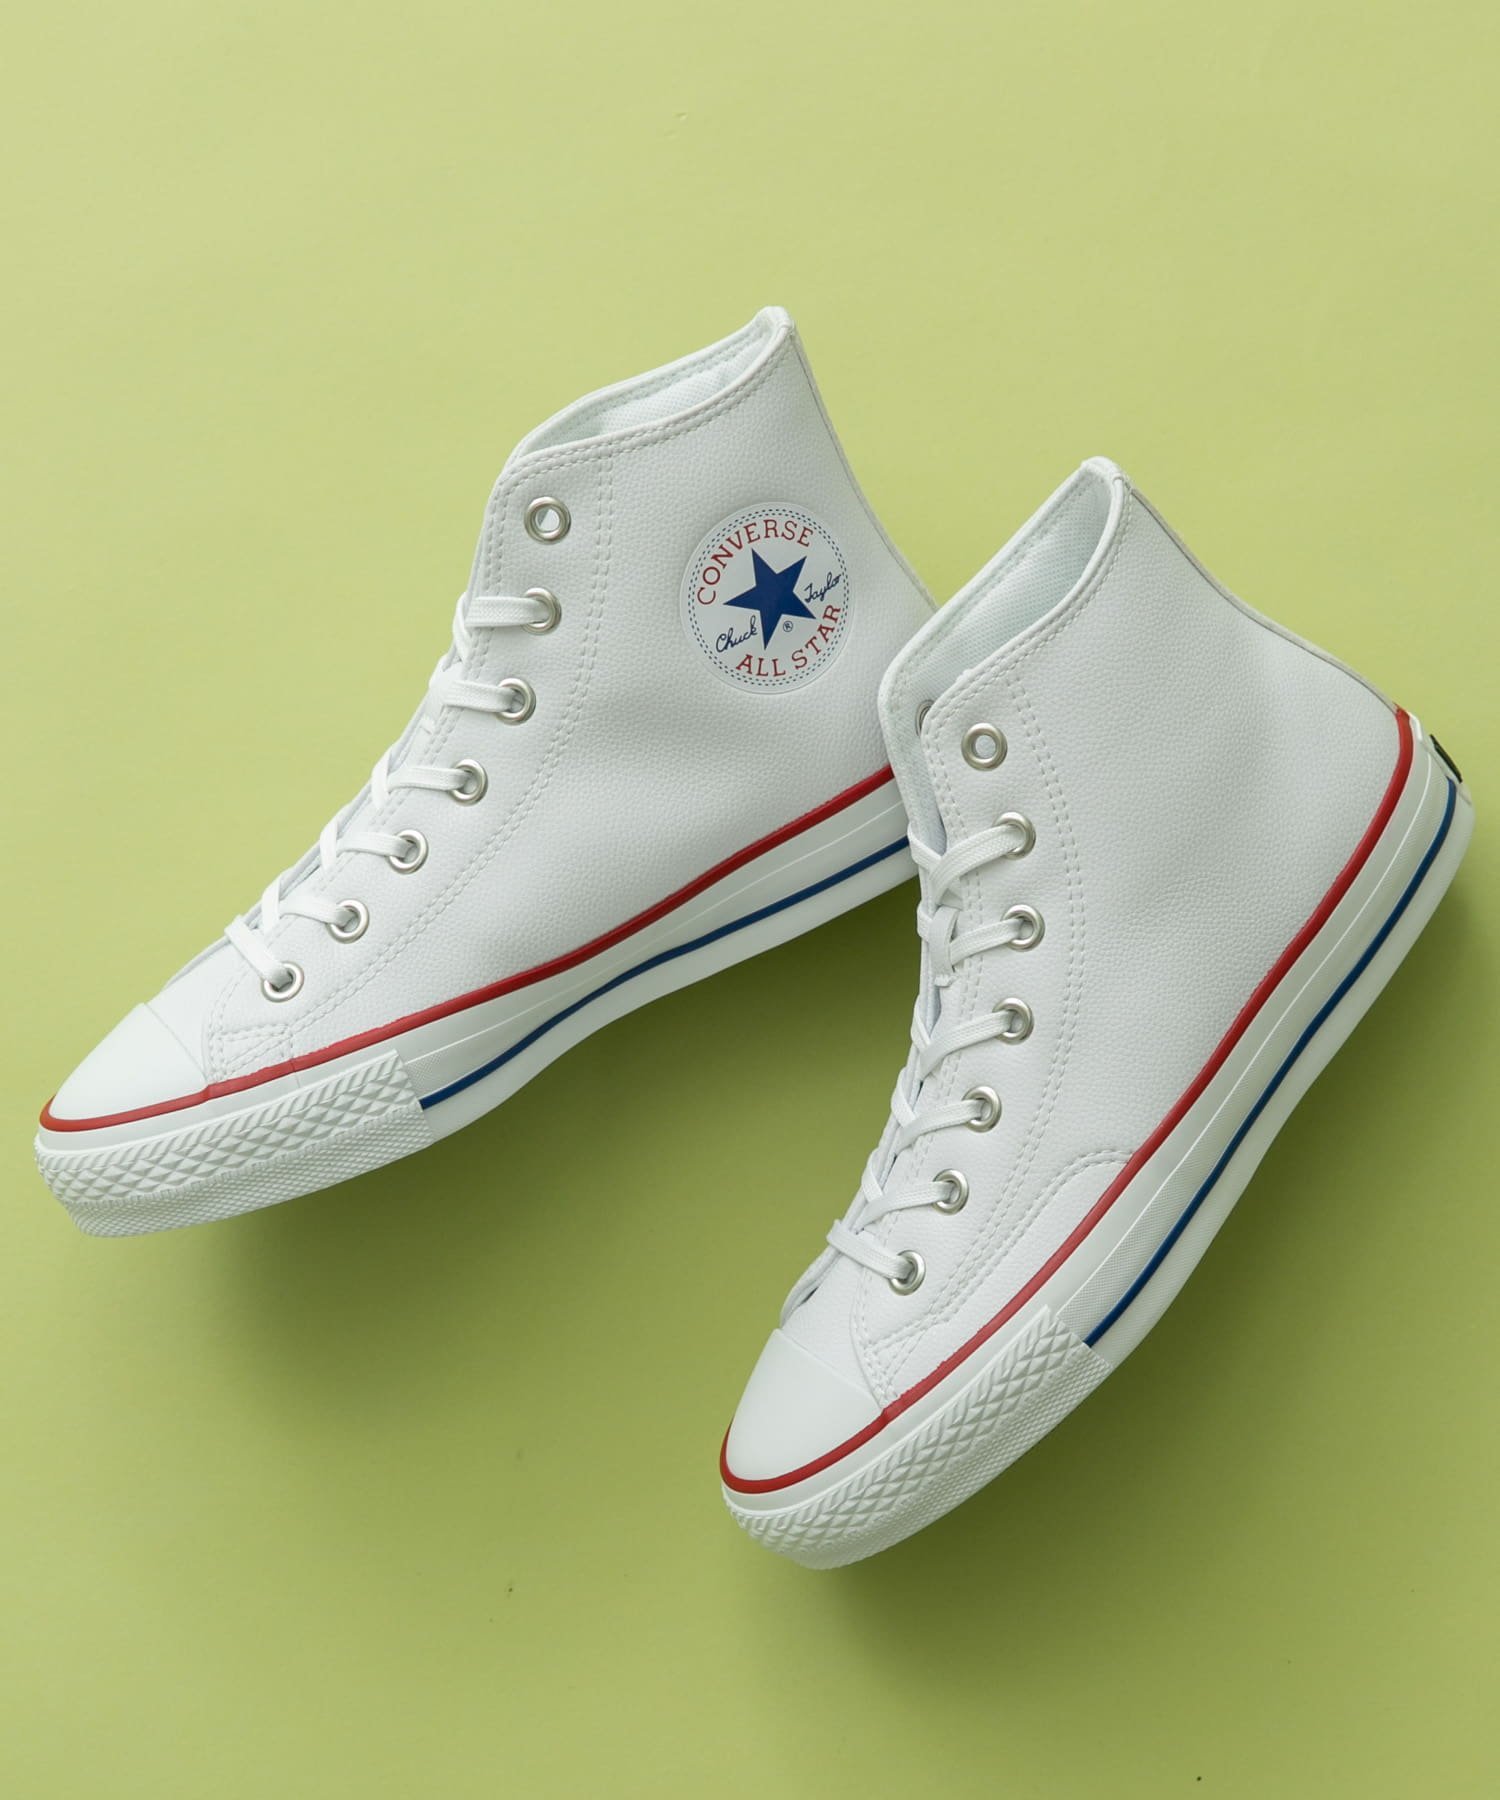 Sonny Label CONVERSE ALL STAR 